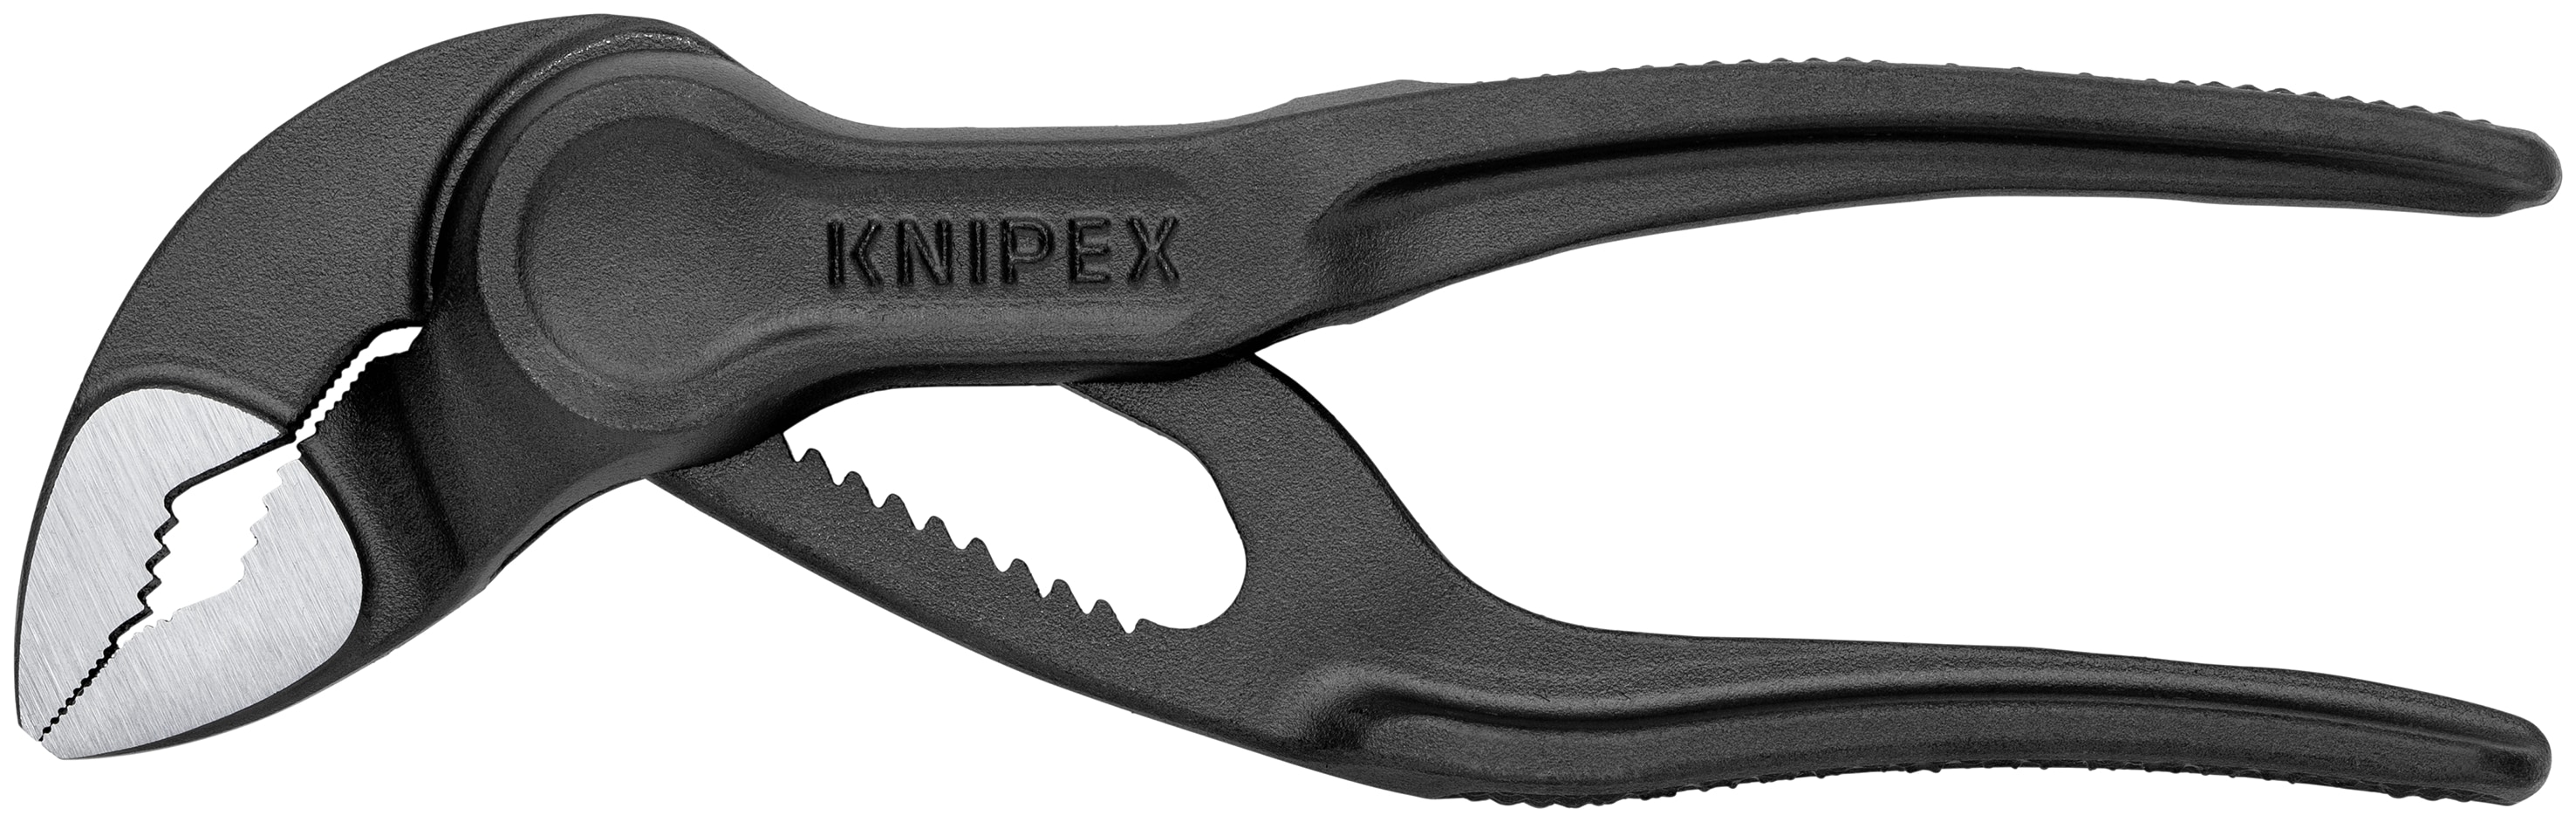 KNIPEX 6.3-in Home Repair Flat Nose Pliers in the Pliers